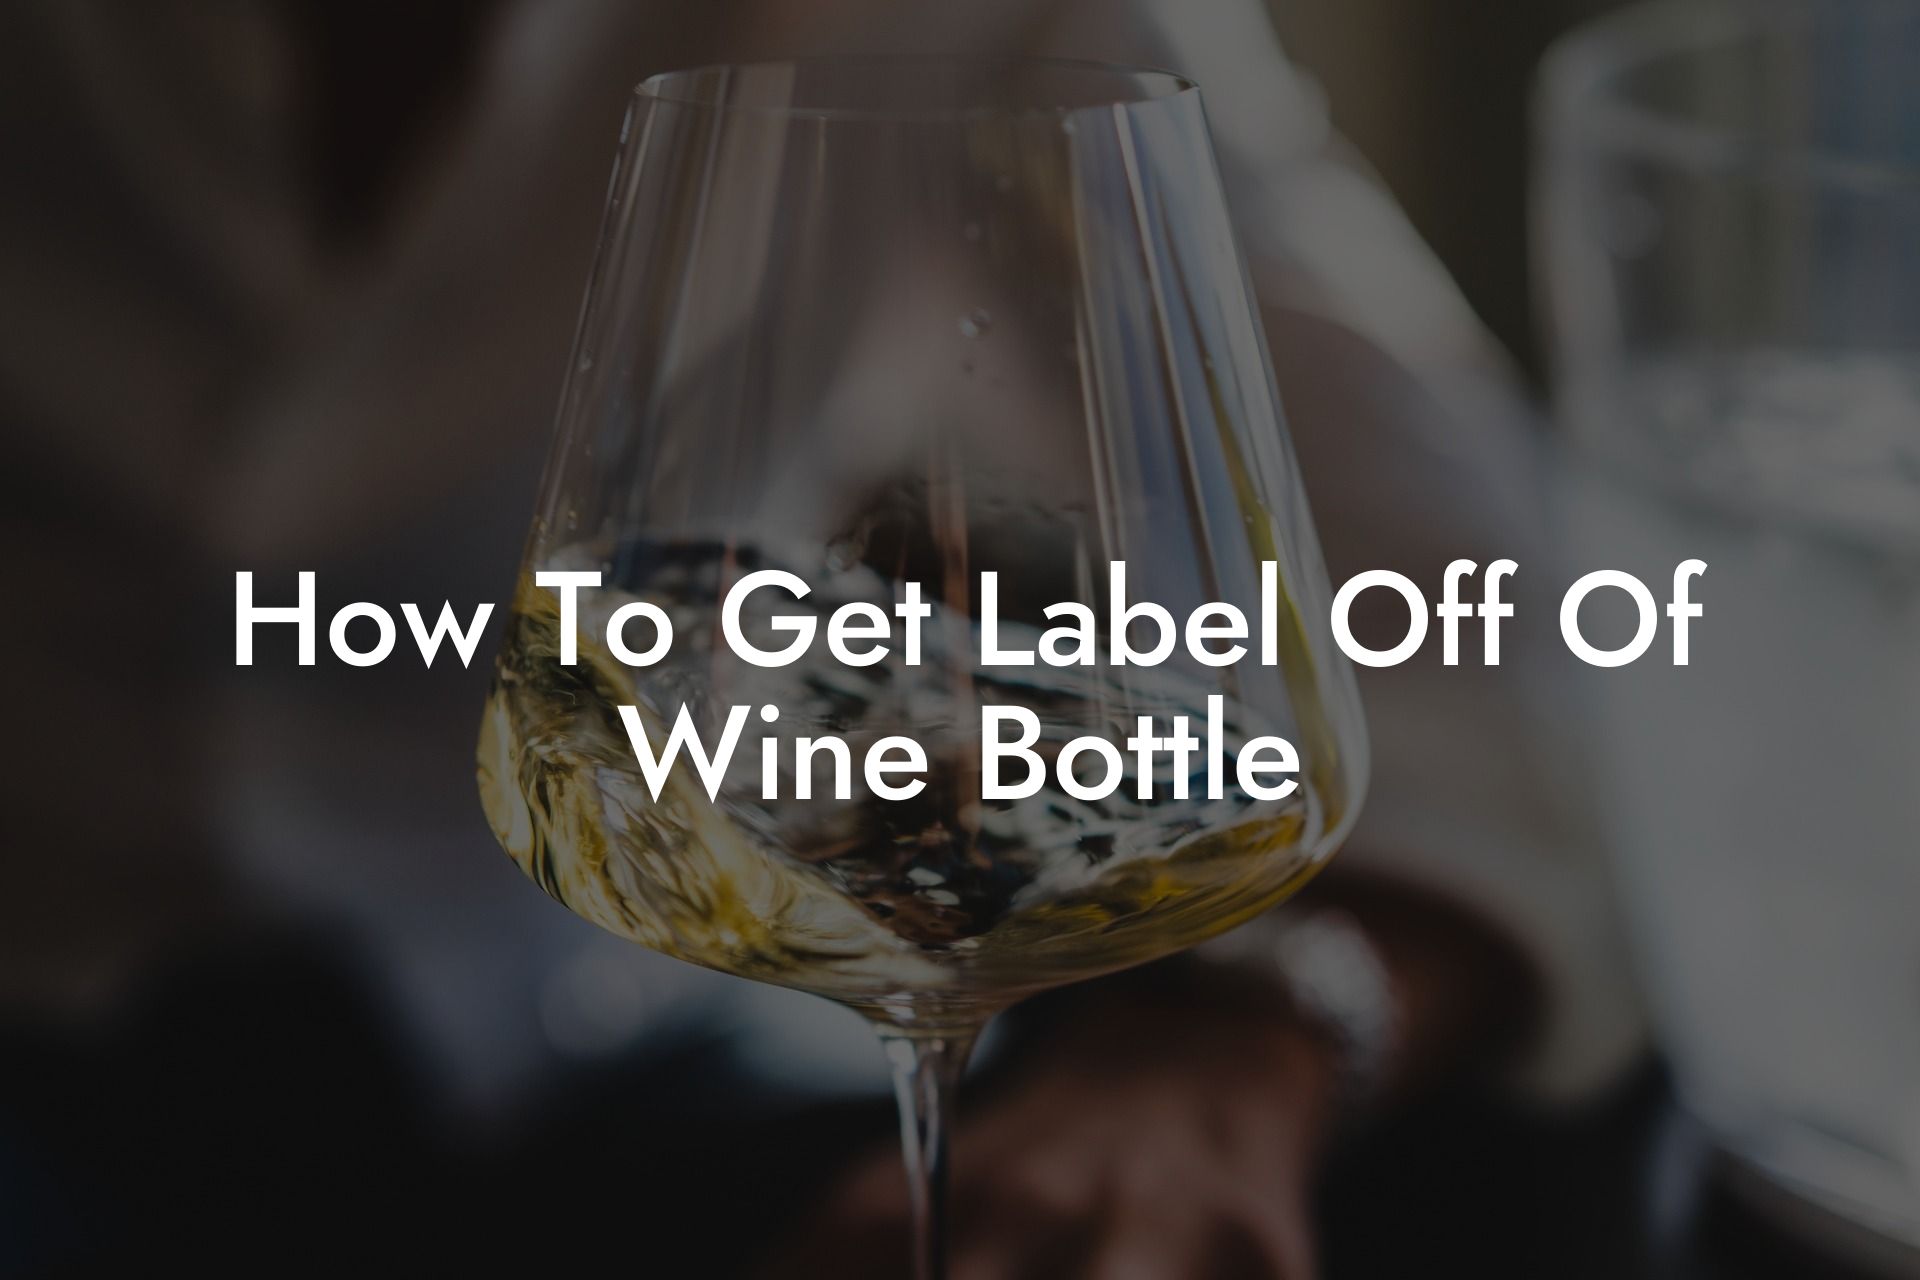 How To Get Label Off Of Wine Bottle